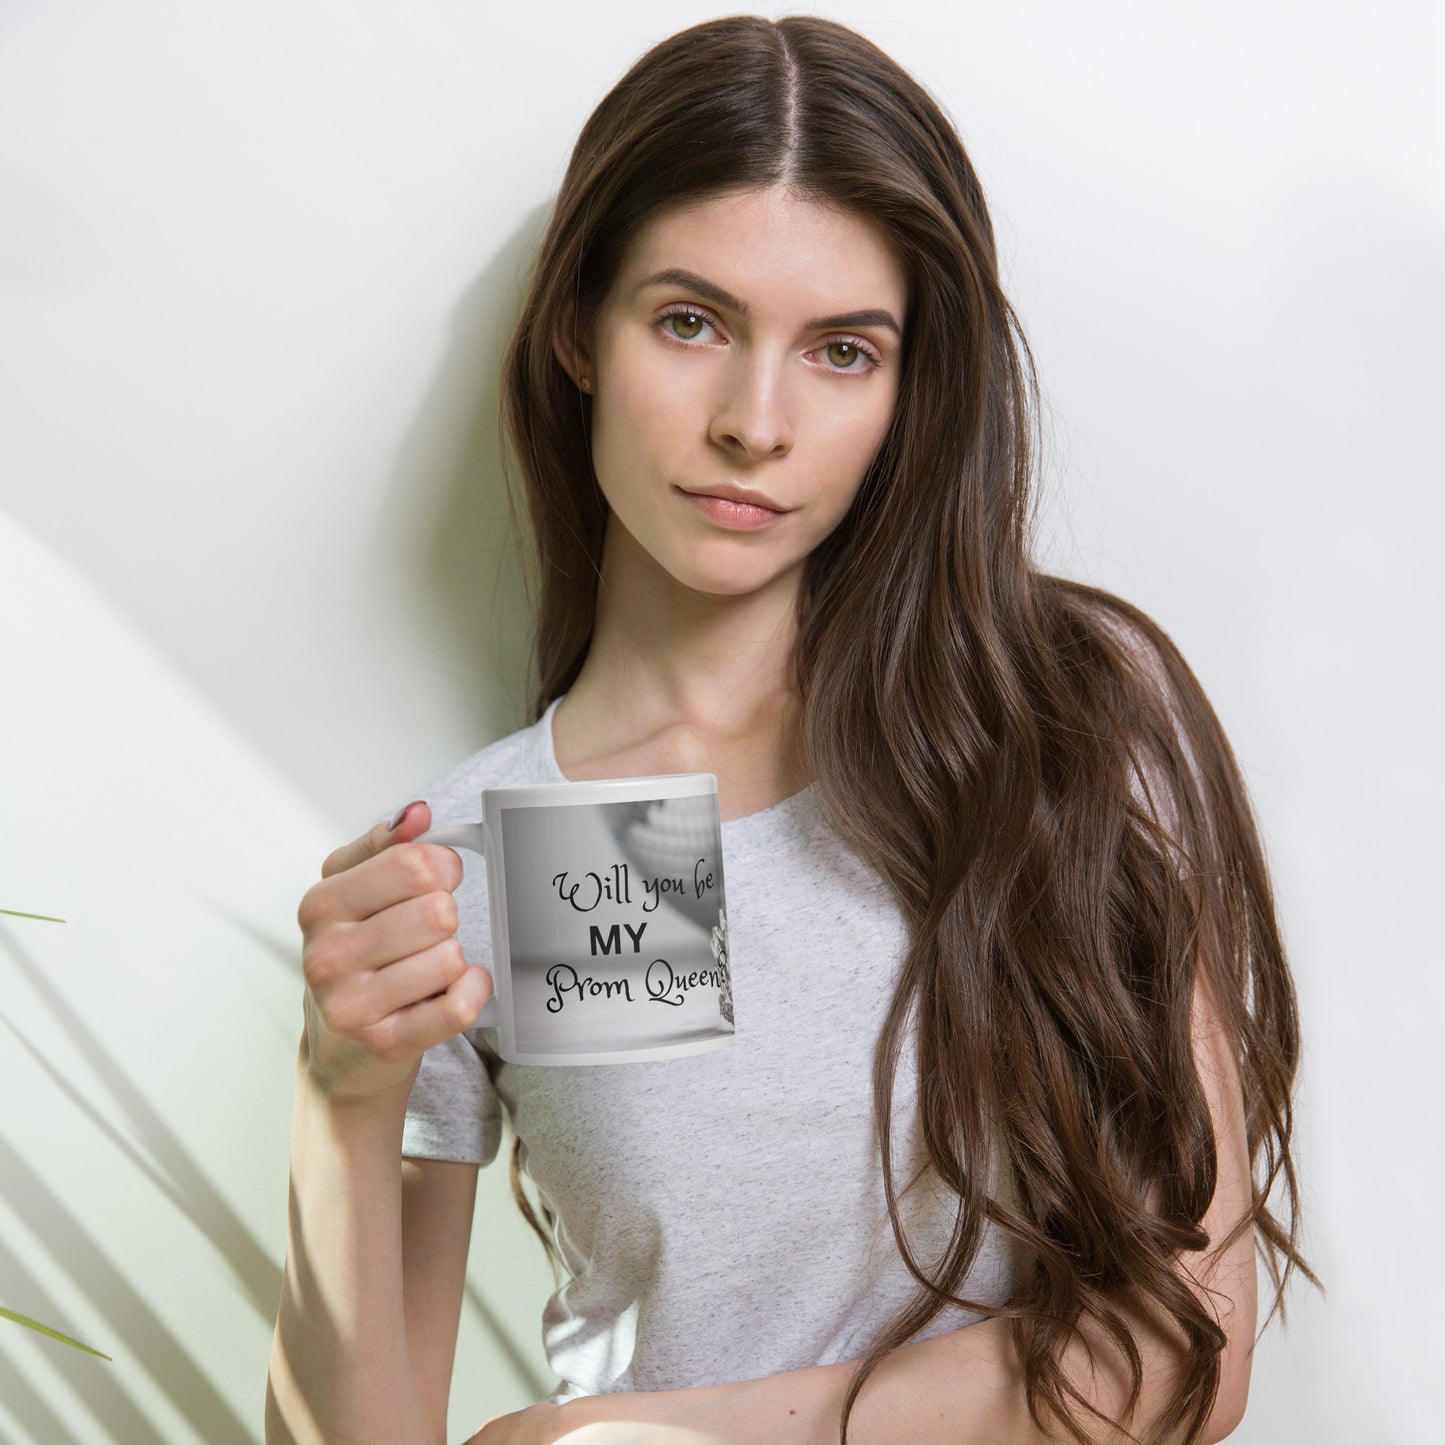 Will You Be My Prom Queen? White Glossy Coffee Mug Asking To Prom* Promposal Idea